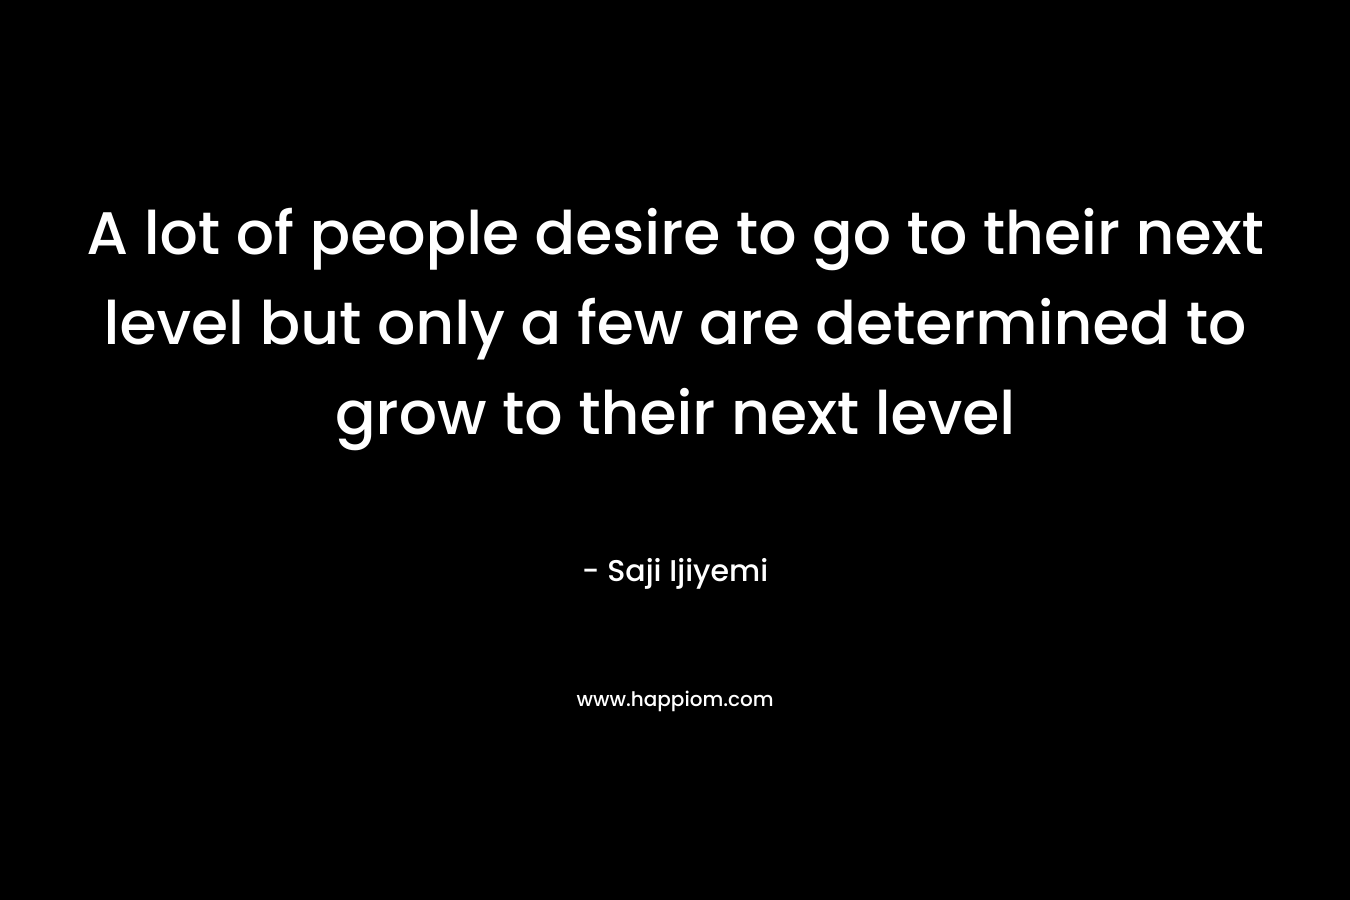 A lot of people desire to go to their next level but only a few are determined to grow to their next level